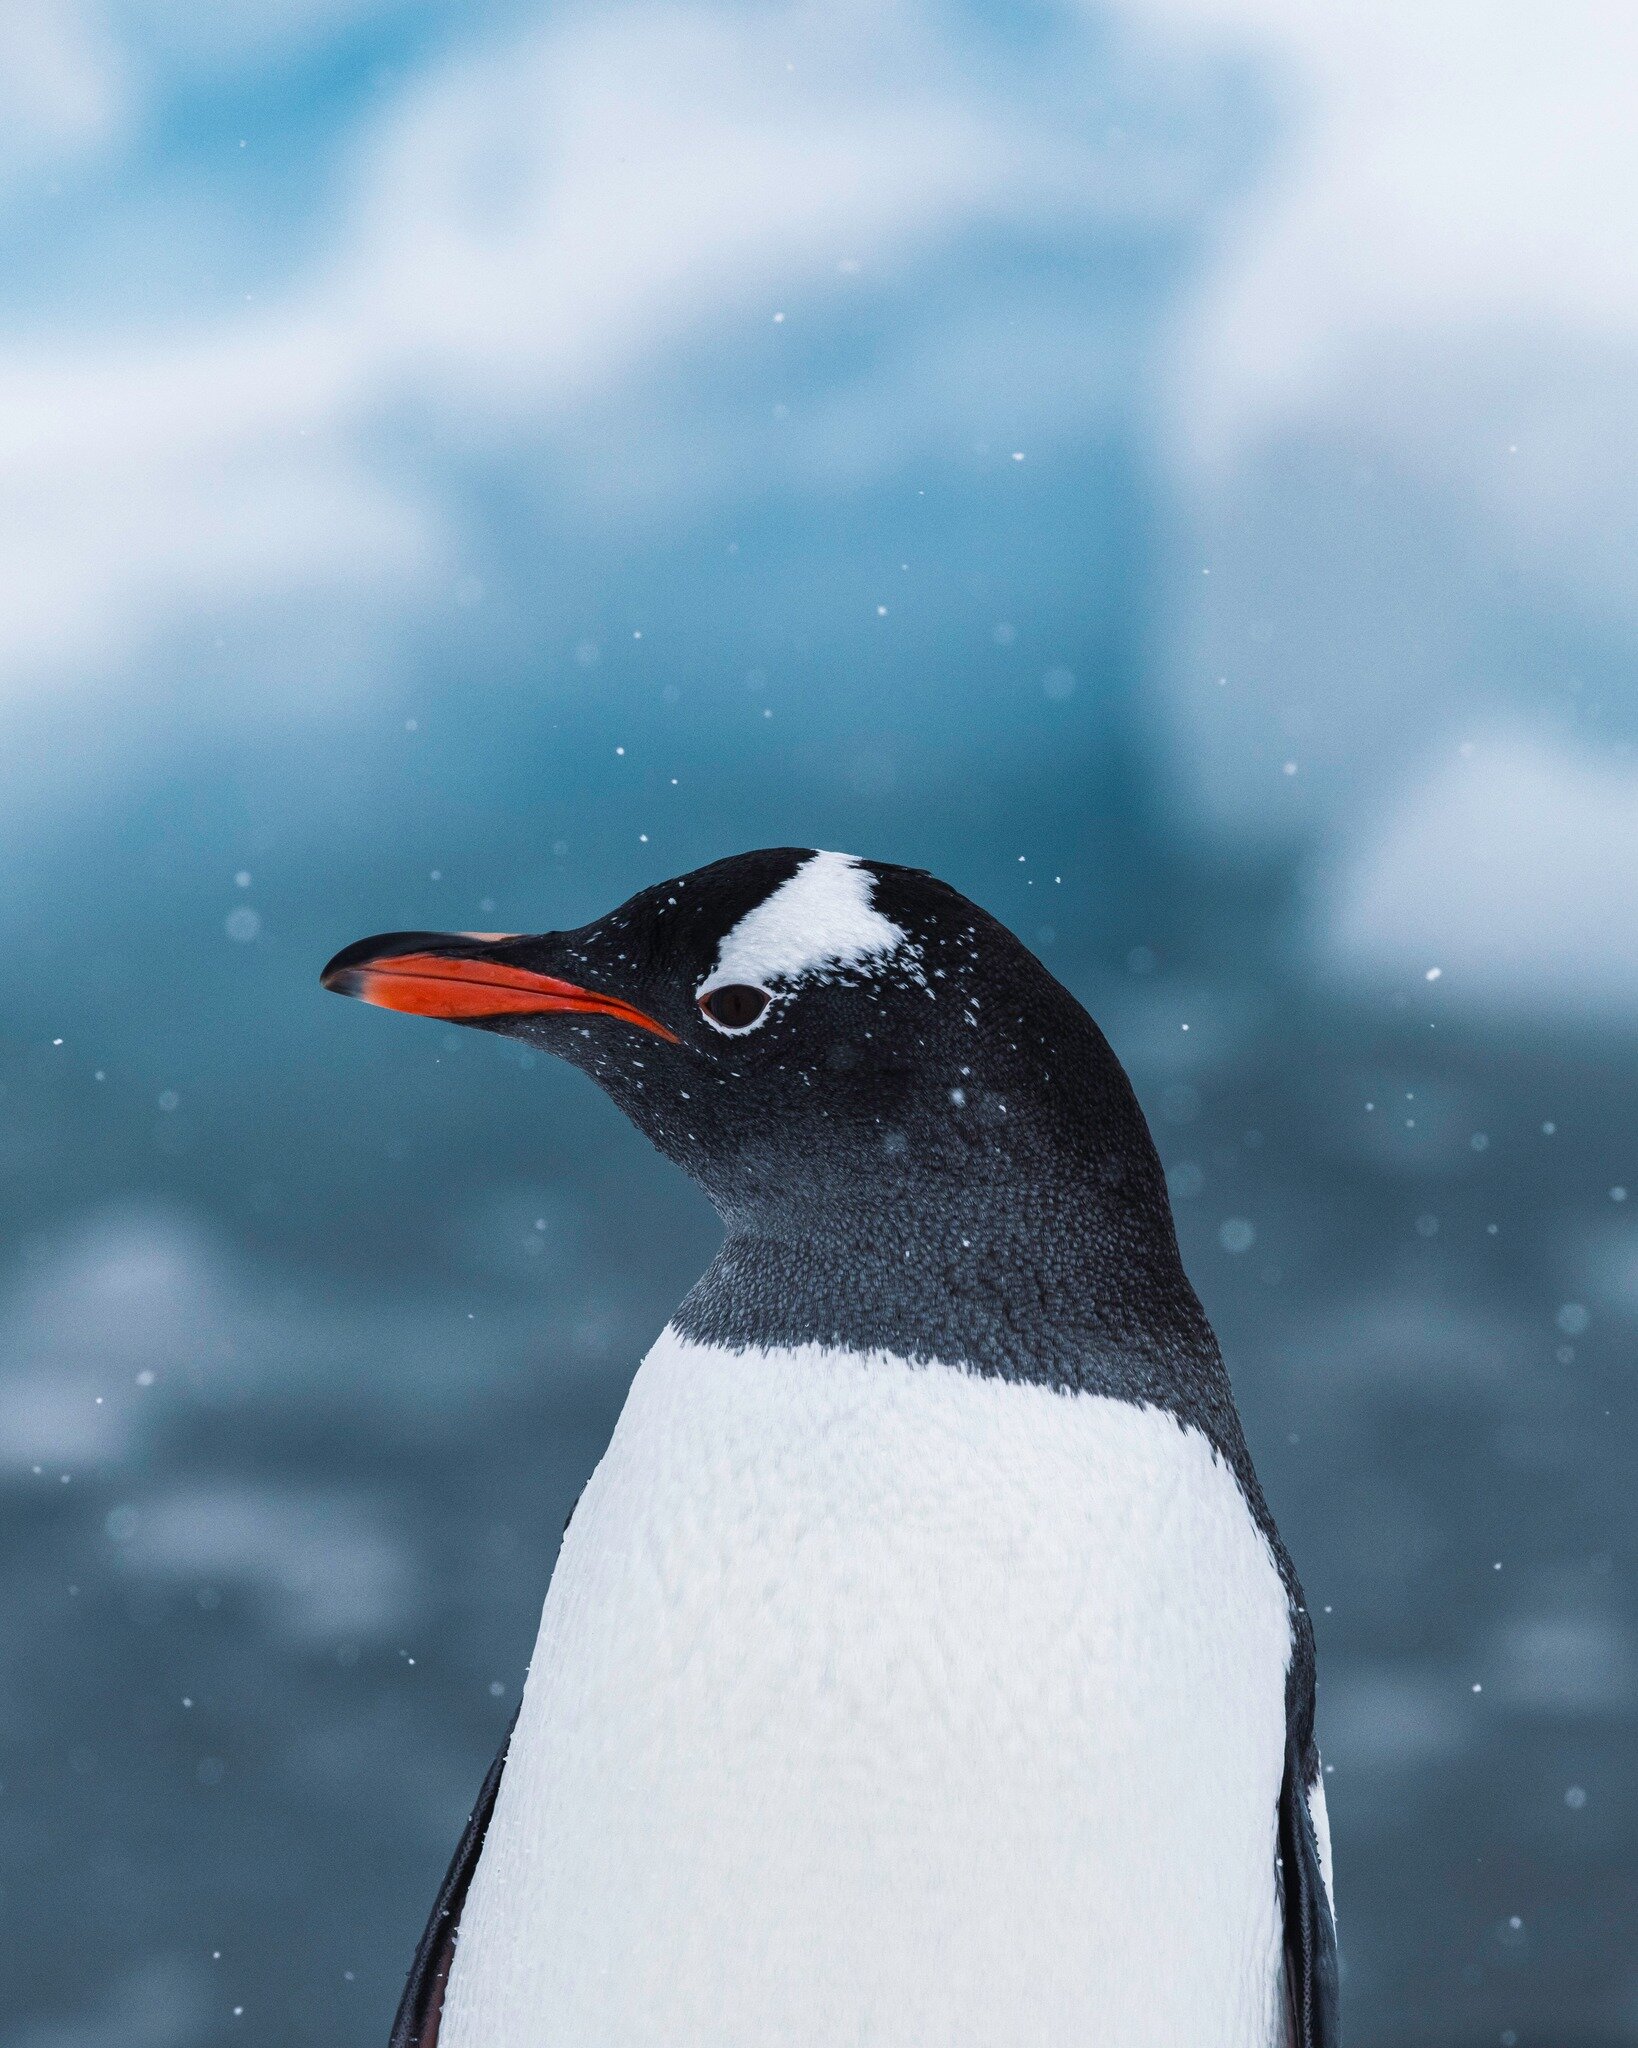 This lovely Gentoo sitting gently in the snowfall.. just kidding it was squawking loudly and waddling all around and falling over rocks and bumping its beak on some ice. I still like them though. #antarctica #expedition #explore 

Shot on @canonusa  